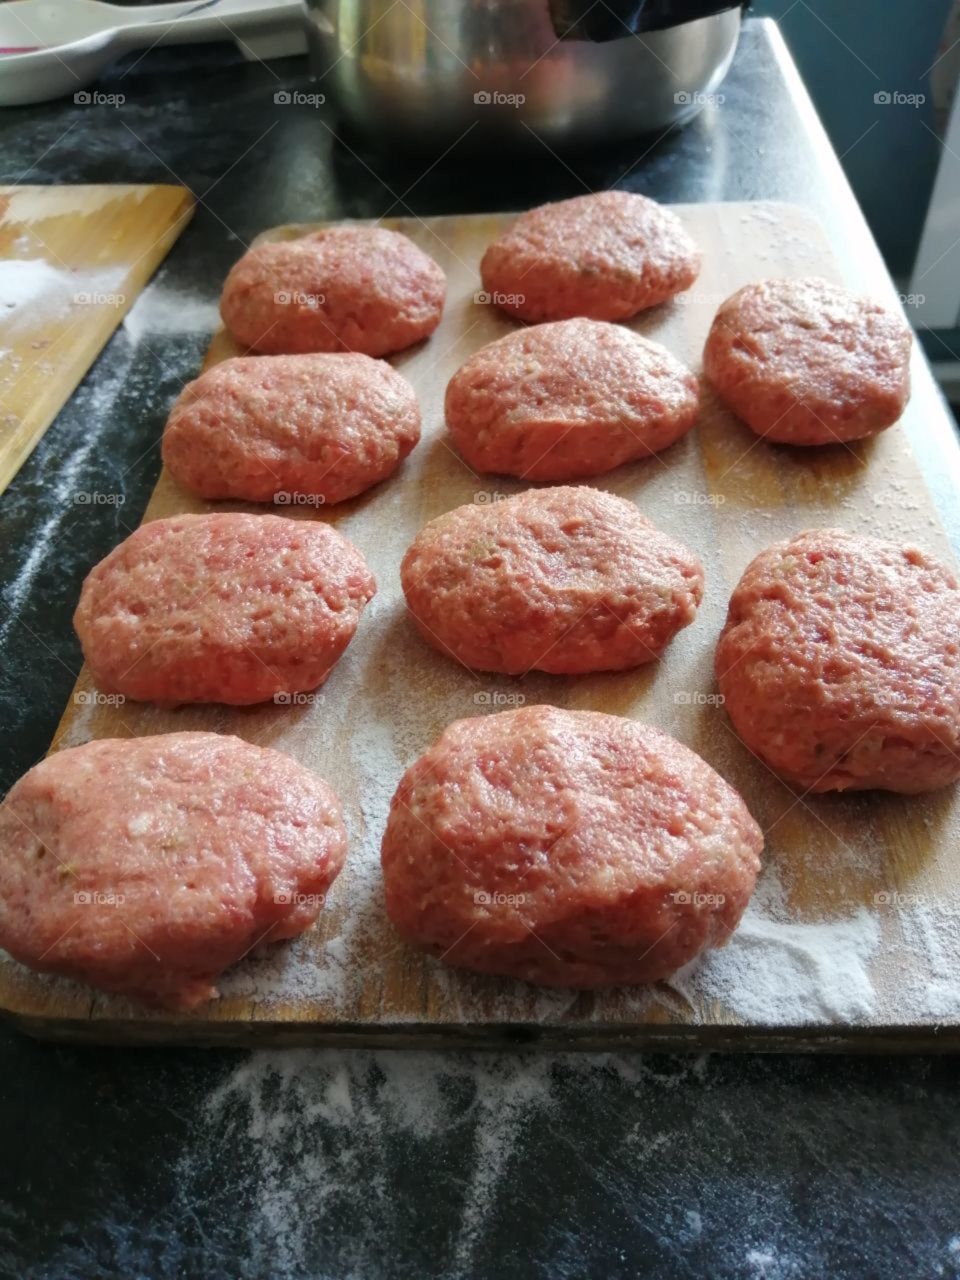 Uncooked meatballs (minced meat) on a wooden cutting board